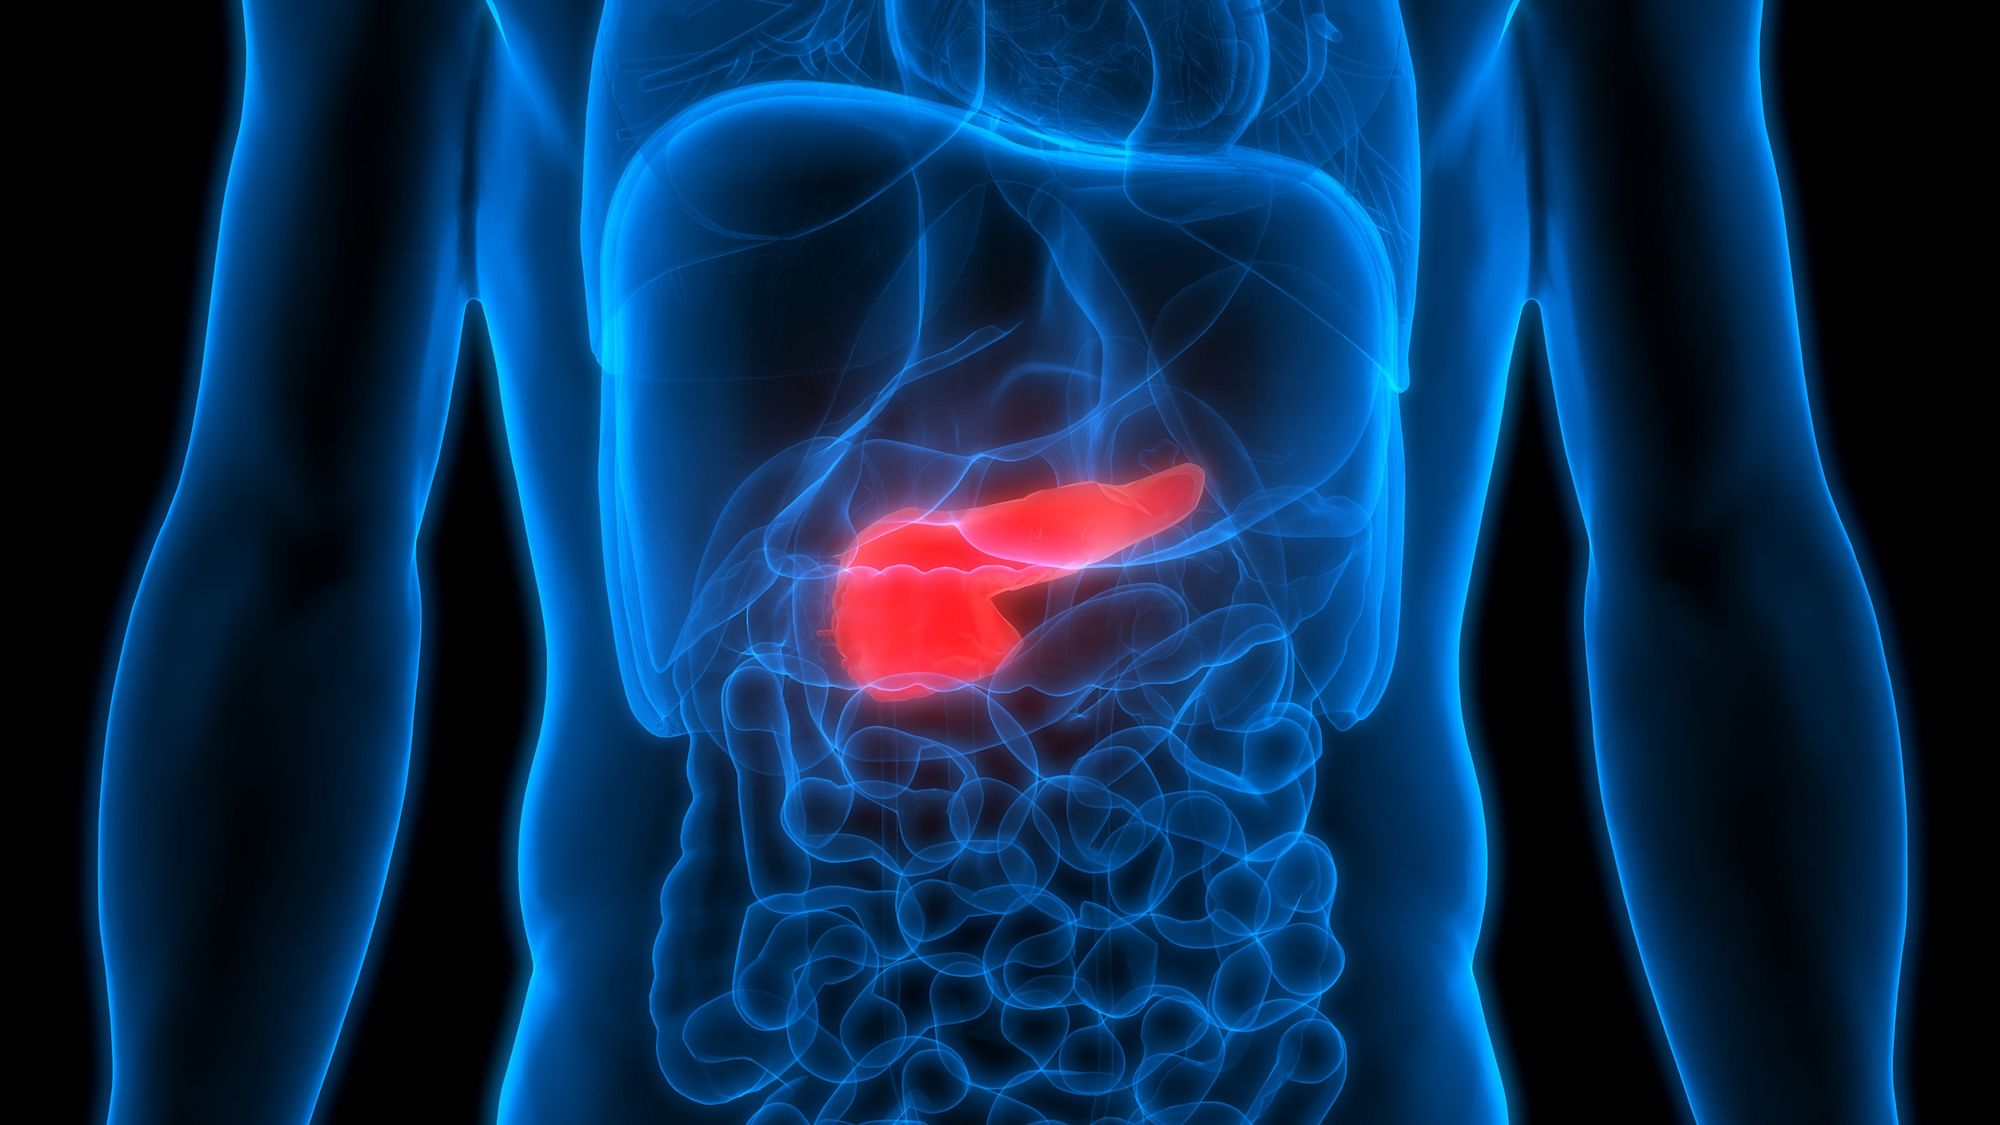 Pancreatic cancer is resistant to all current treatments.